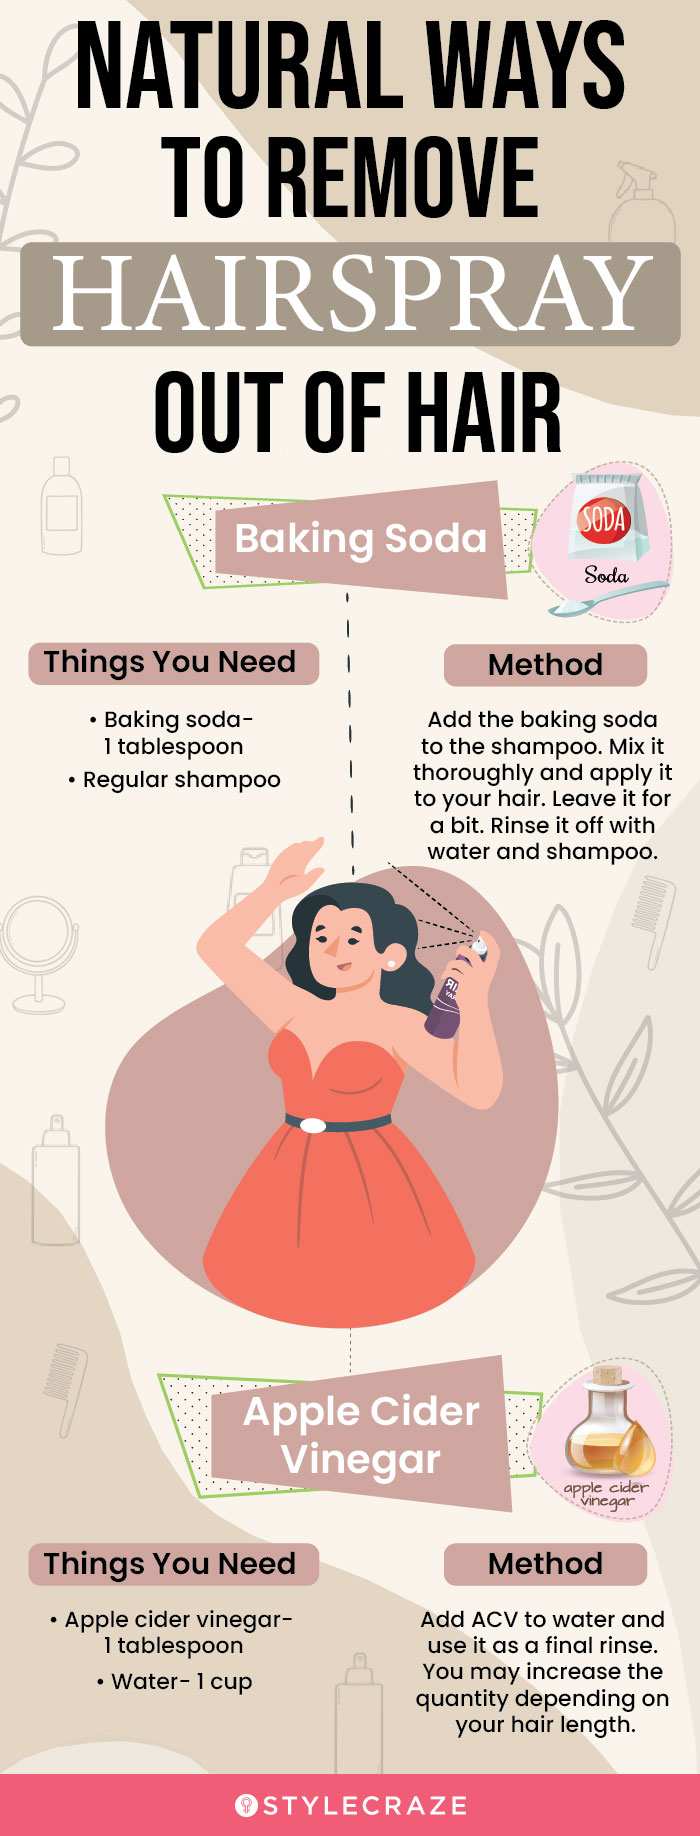 natural ways to remove hairspray out of hair (infographic)